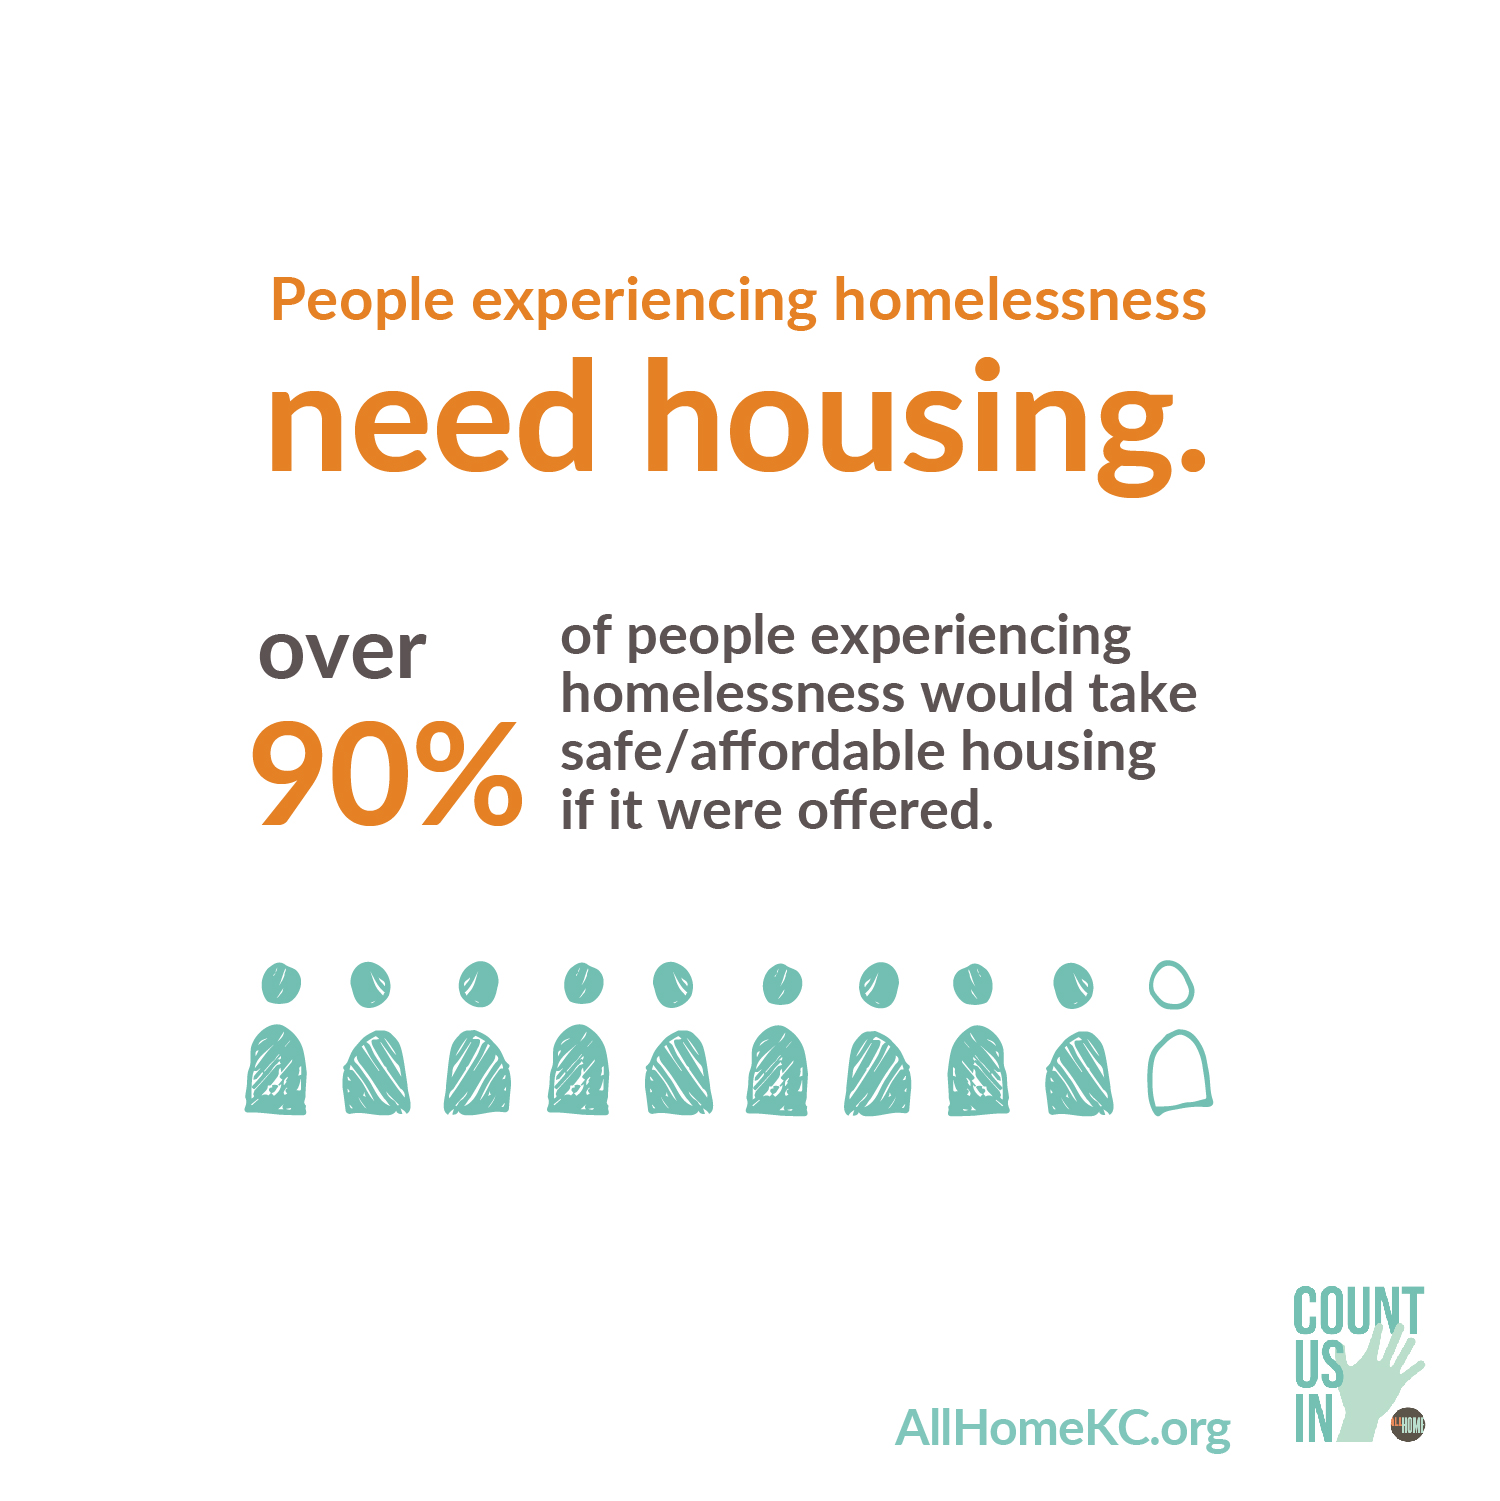 90% of people experiencing homelessness would take safe/affordable housing if it were offered